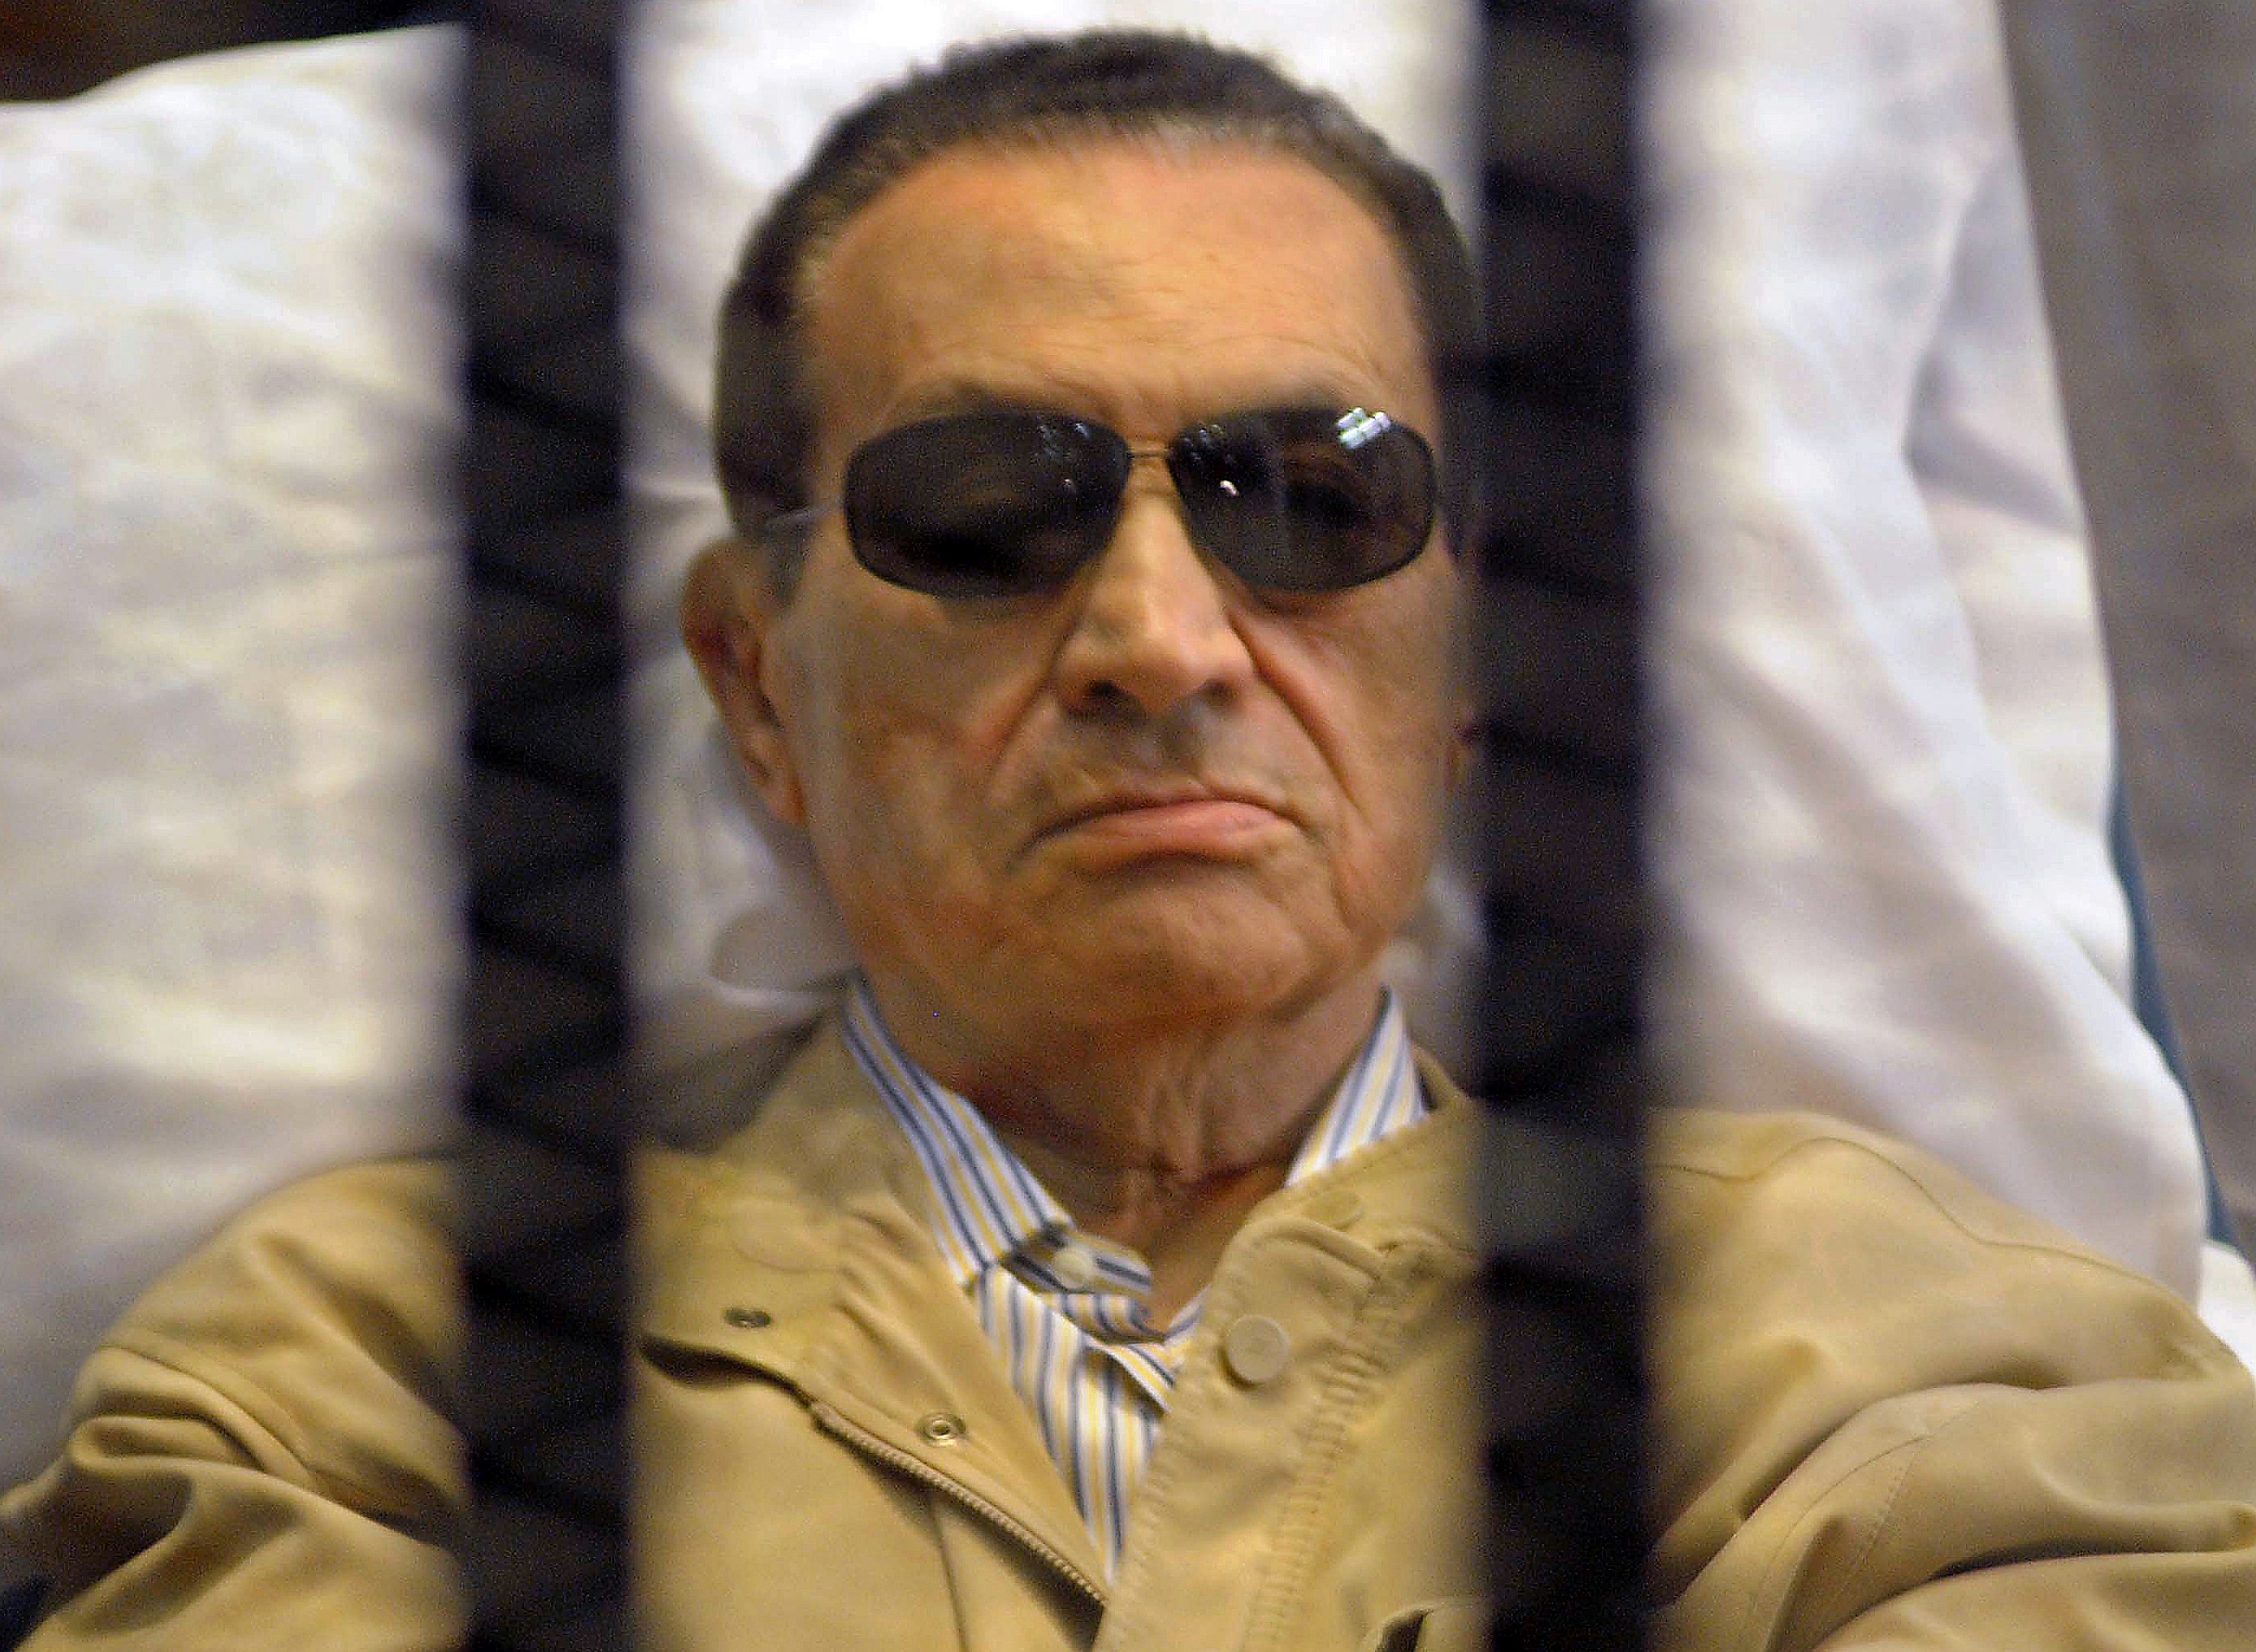 The retrial for former president Hosni Mubarak, his two sons, the former Interior Minister Habib Al-Adly and six of his aides will take place on 13 April (File Photo) (AFP Photo)